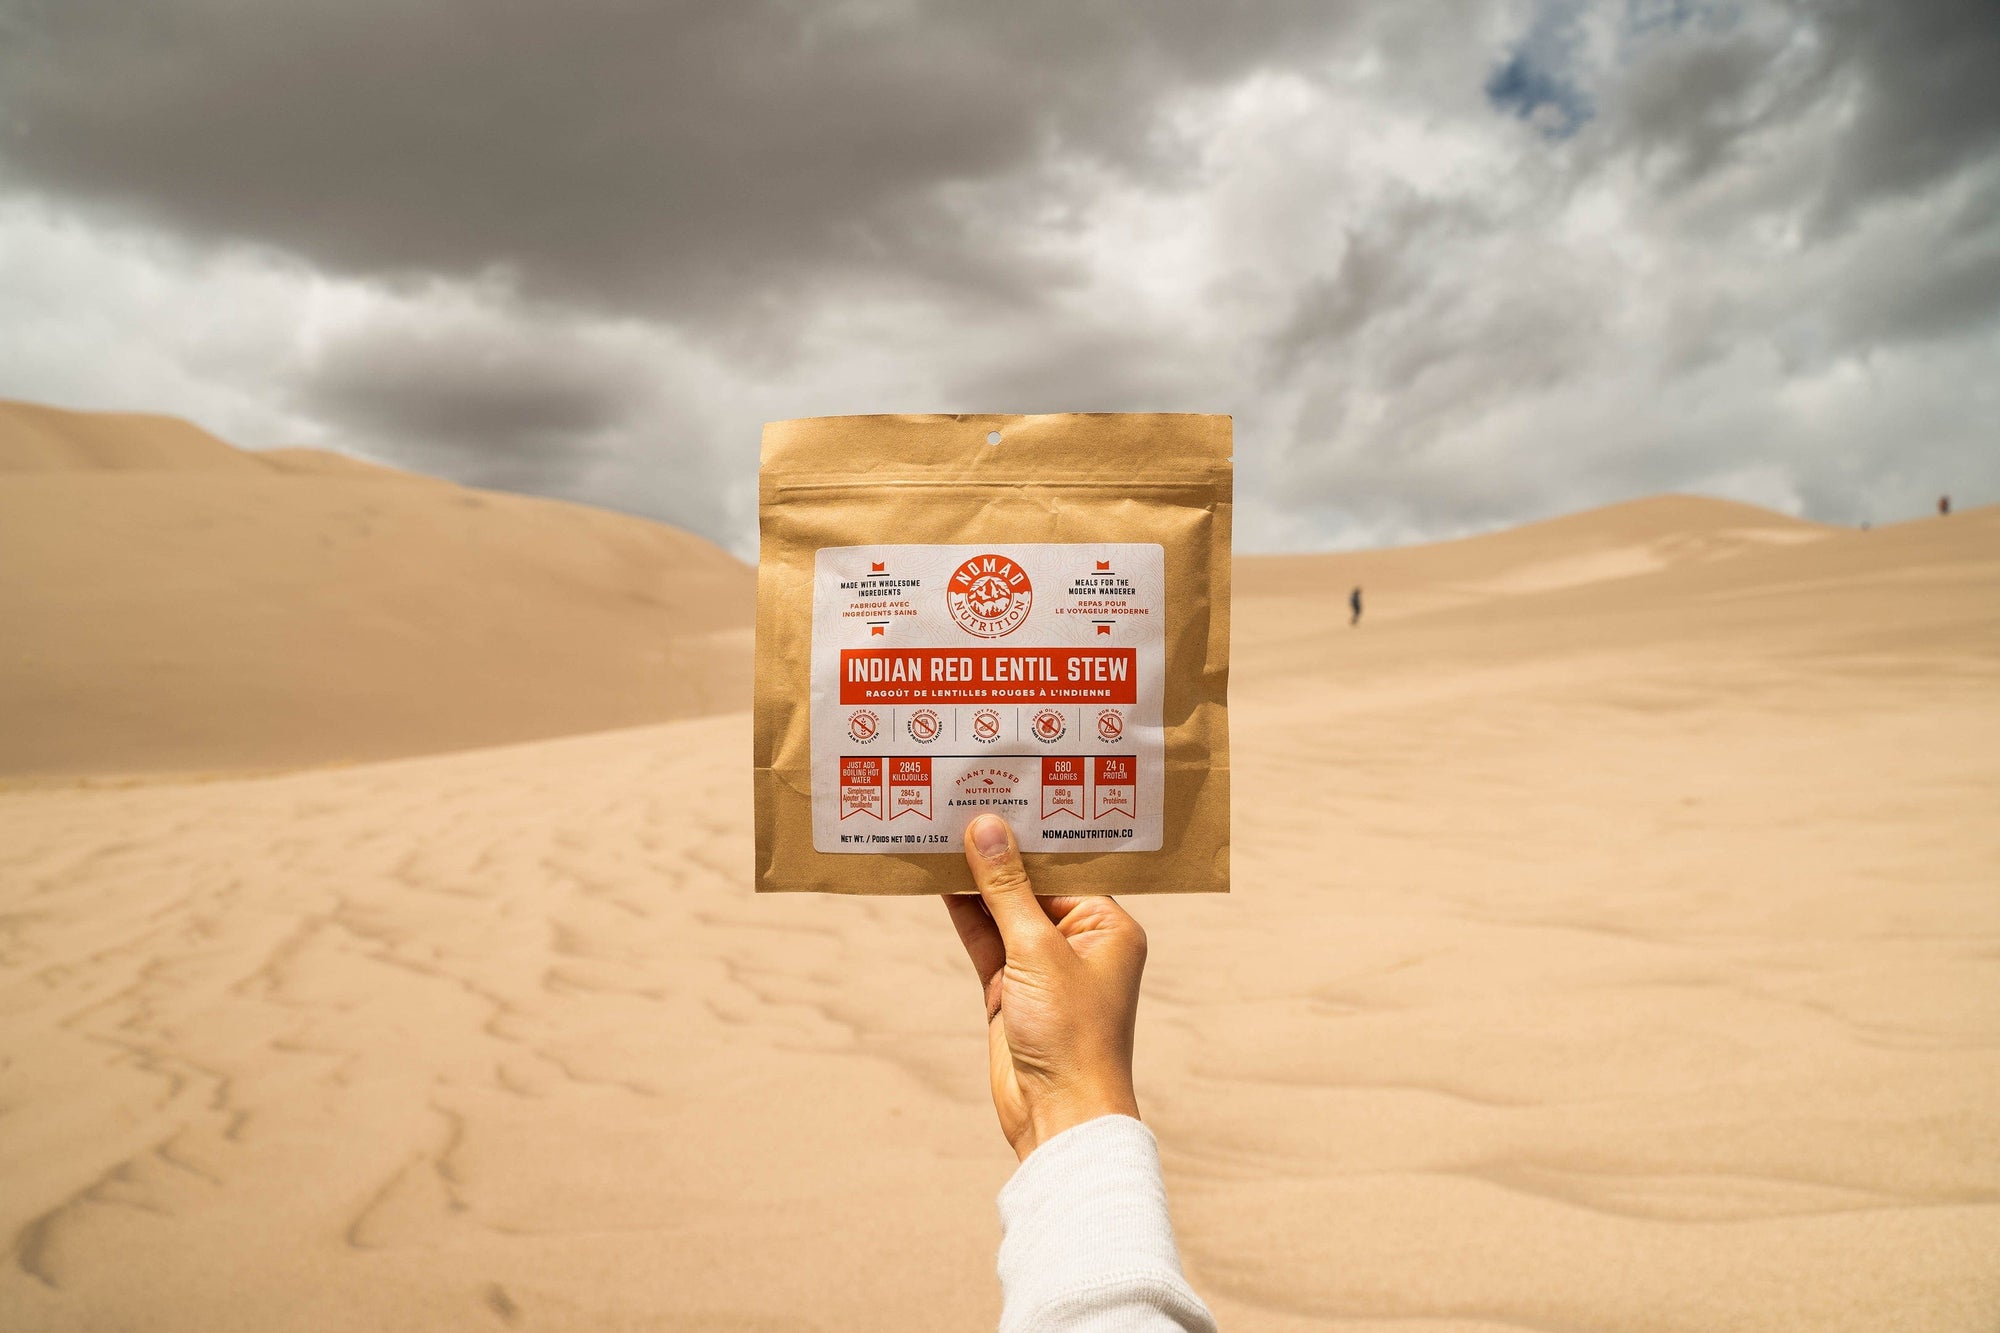  Nomad Nutrition Indian Red Lentil Stew (112g/ 4oz), dehydrated,  vegan, adventure, plant-based, gluten-free meal overlooking the scenic outdoor view in the desert. Perfect for trips to national parks.